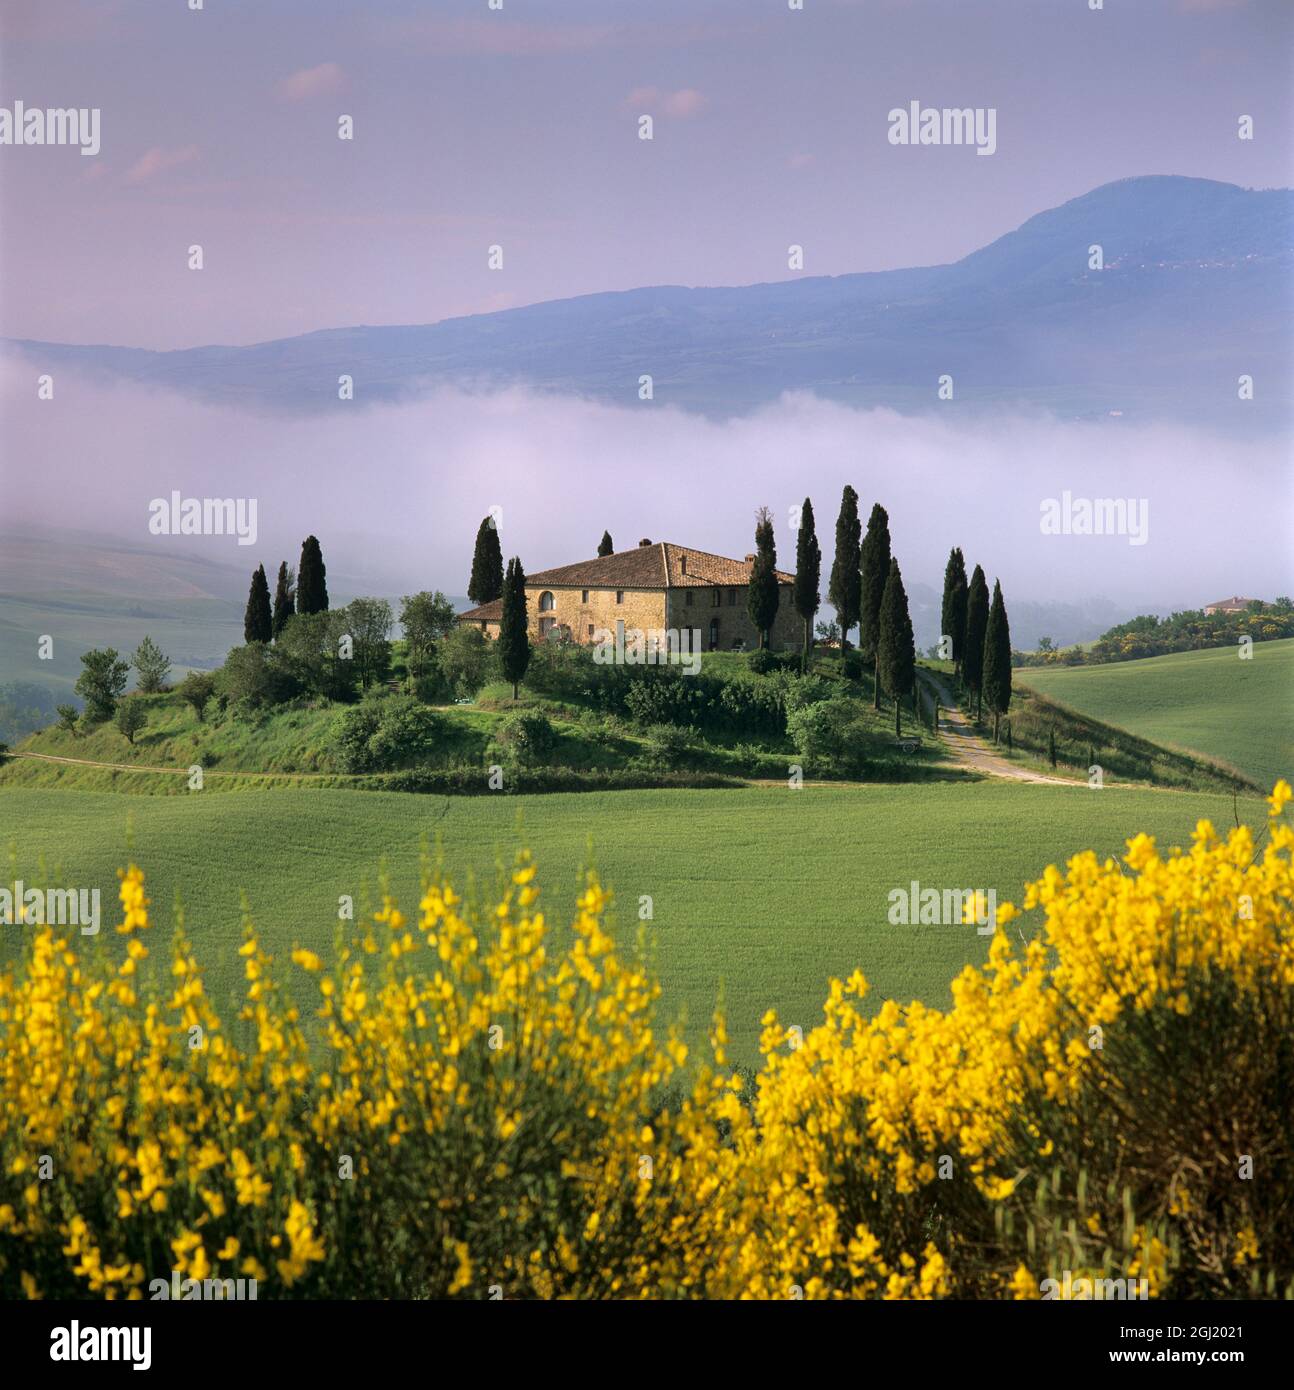 Tuscan farmhouse with cypress trees in misty landscape at sunrise, San Quirico d'Orcia, Siena Province, Tuscany, Italy, Europe Stock Photo